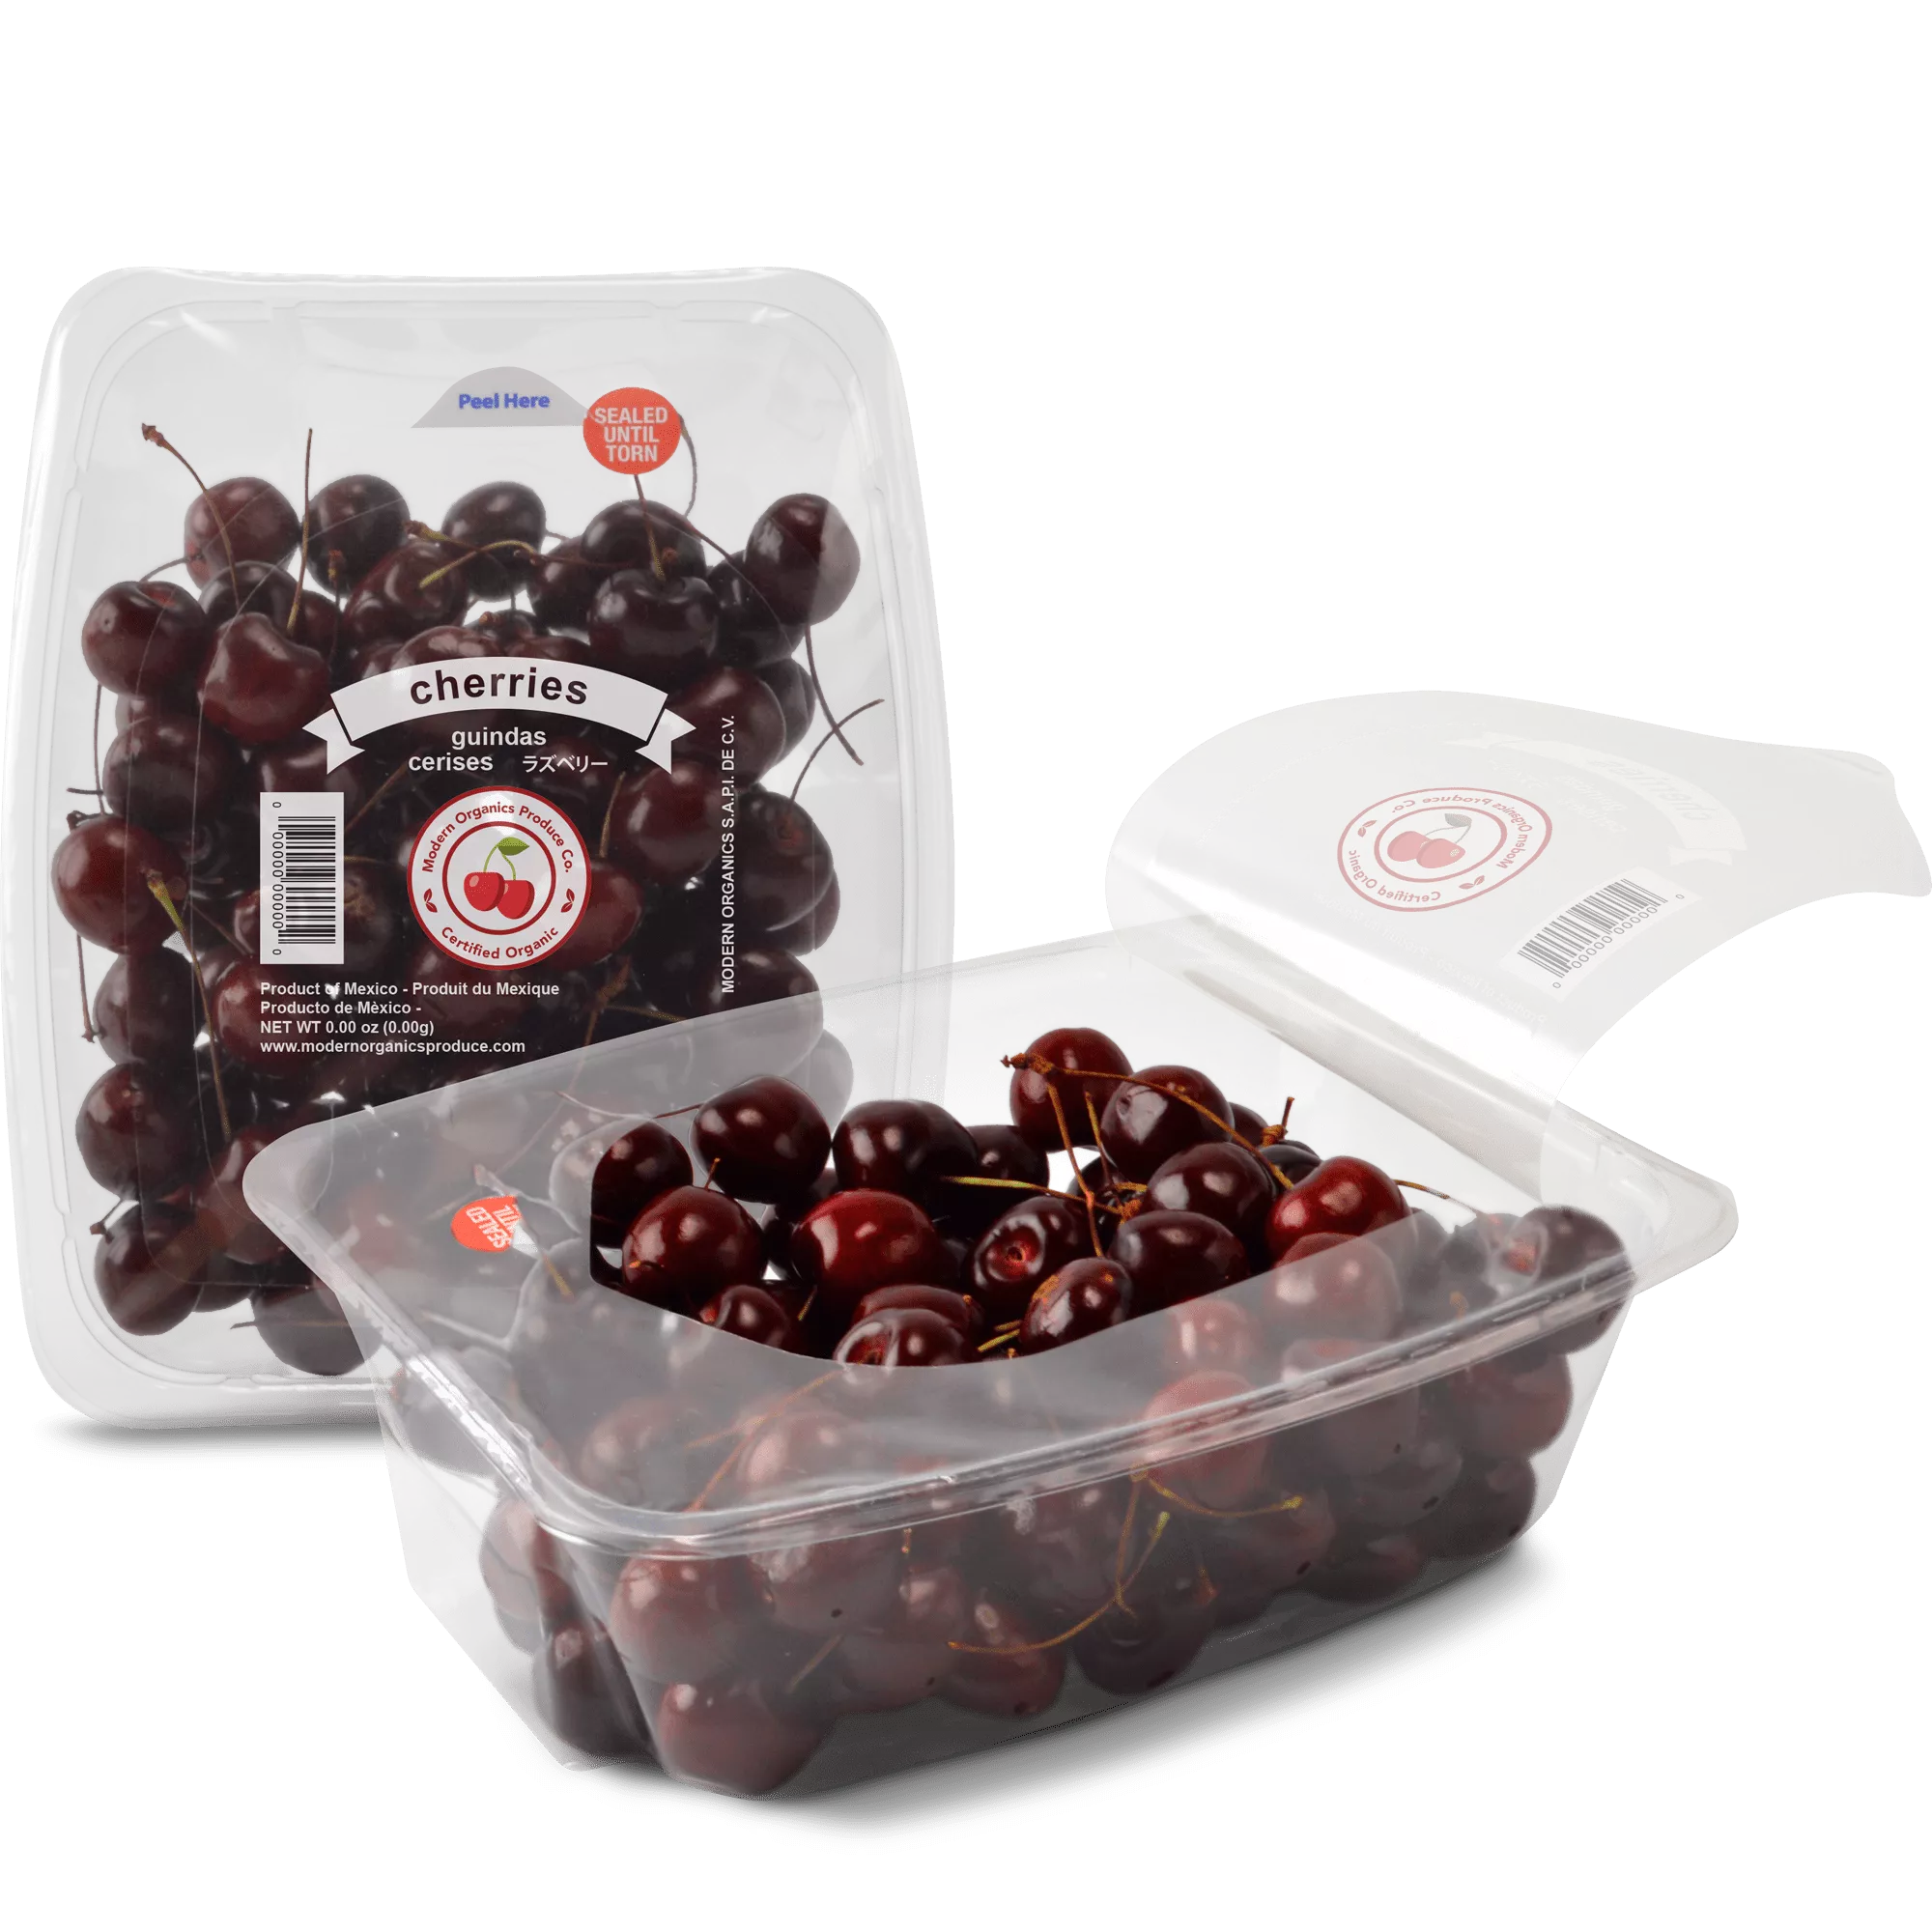 Peel and reseal produce packaging